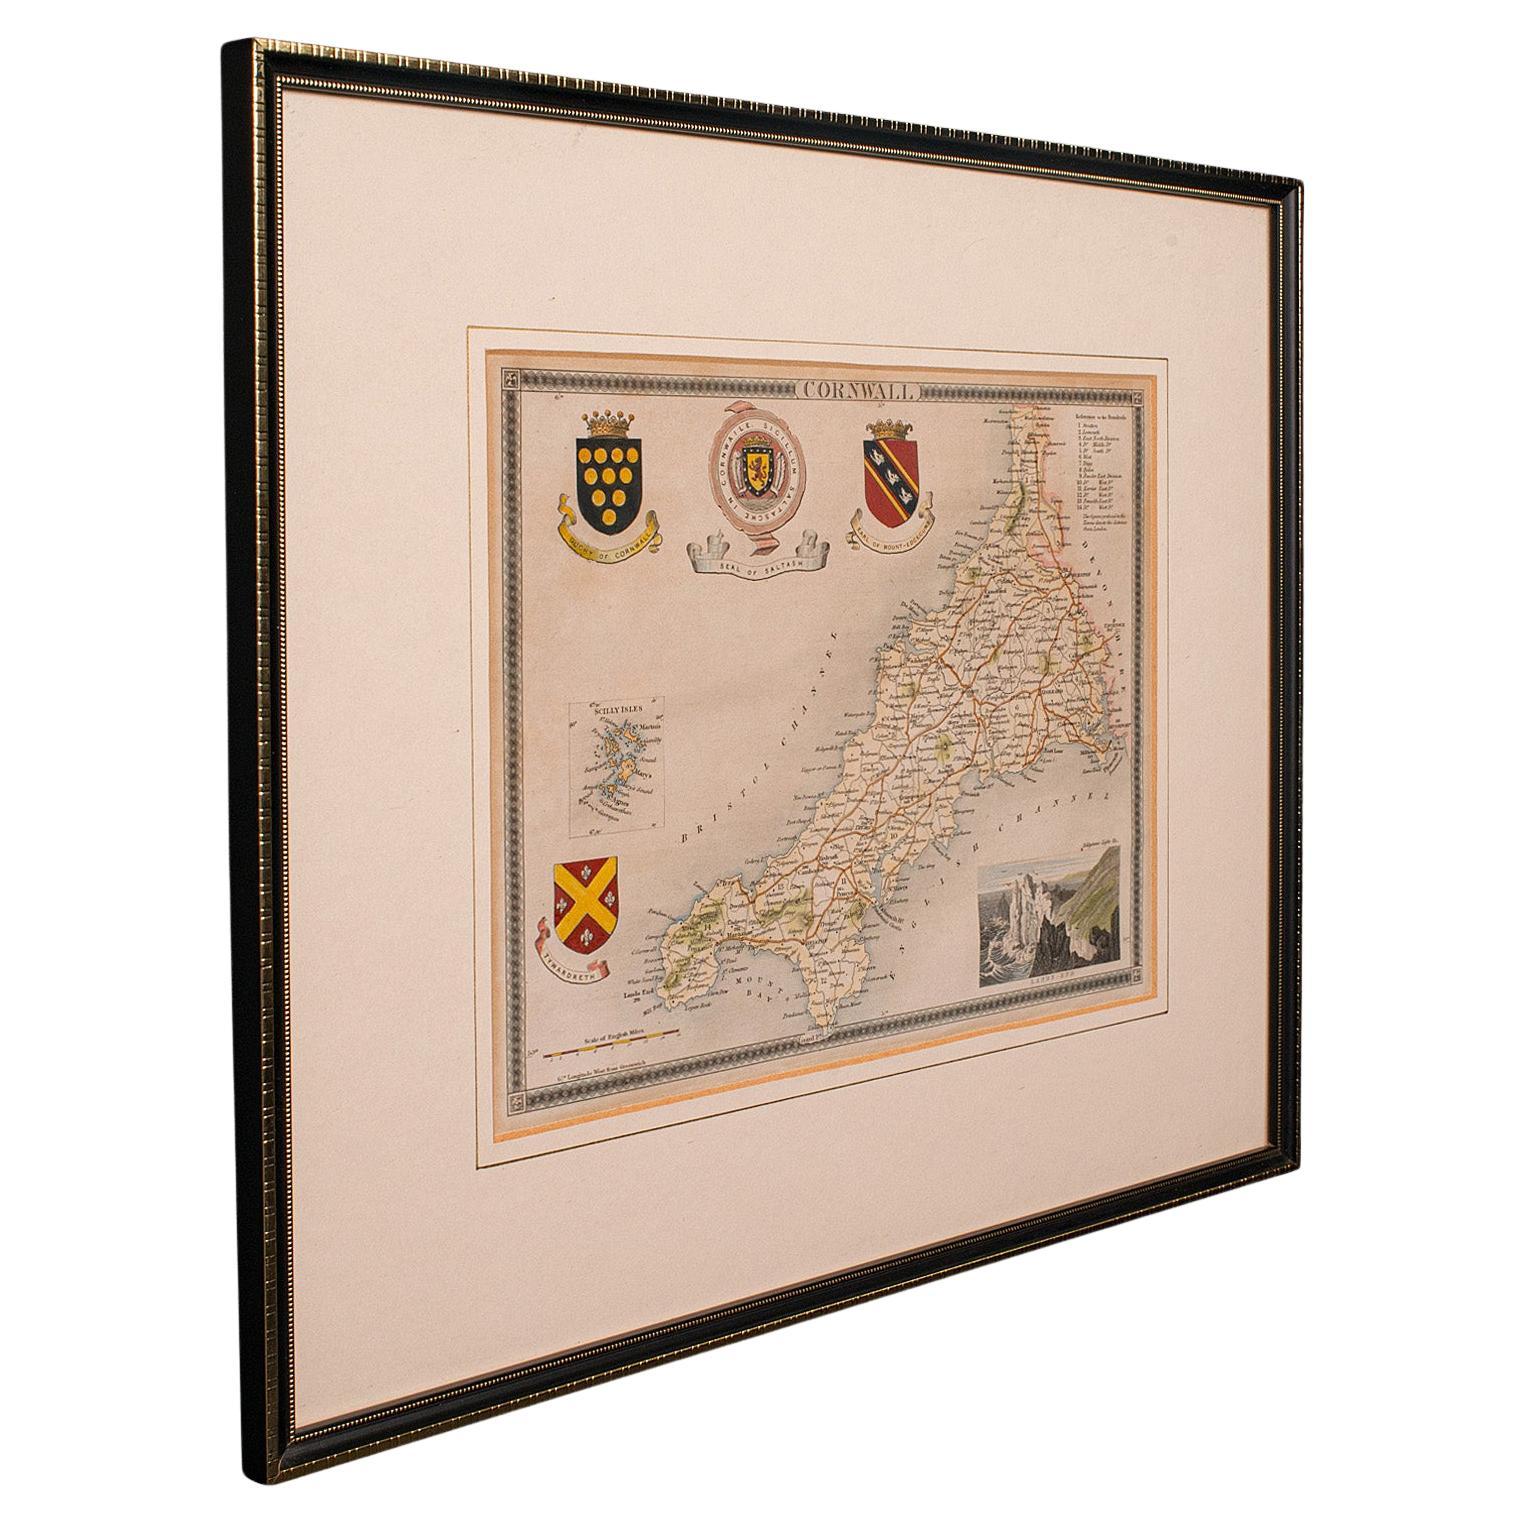 Antique Lithography Map, Cornwall, English Framed Engraving, Cartography, C.1850 For Sale